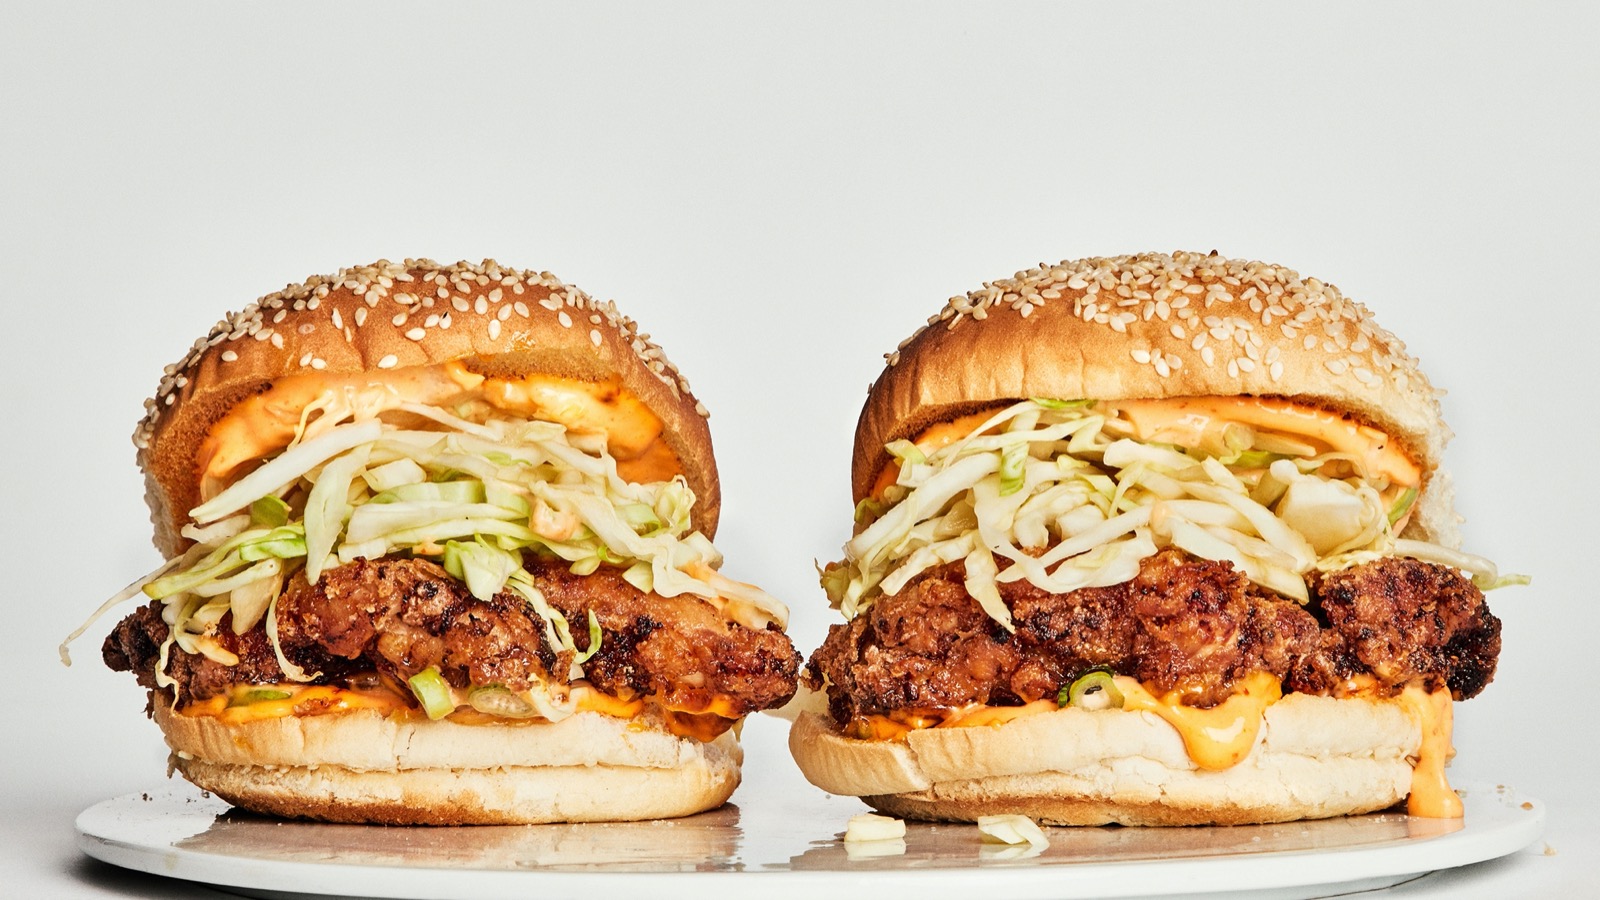 🥪 Say “Yum” Or “Yuck” to These Sandwiches and We’ll Accurately Guess Your Age Fried chicken sandwich